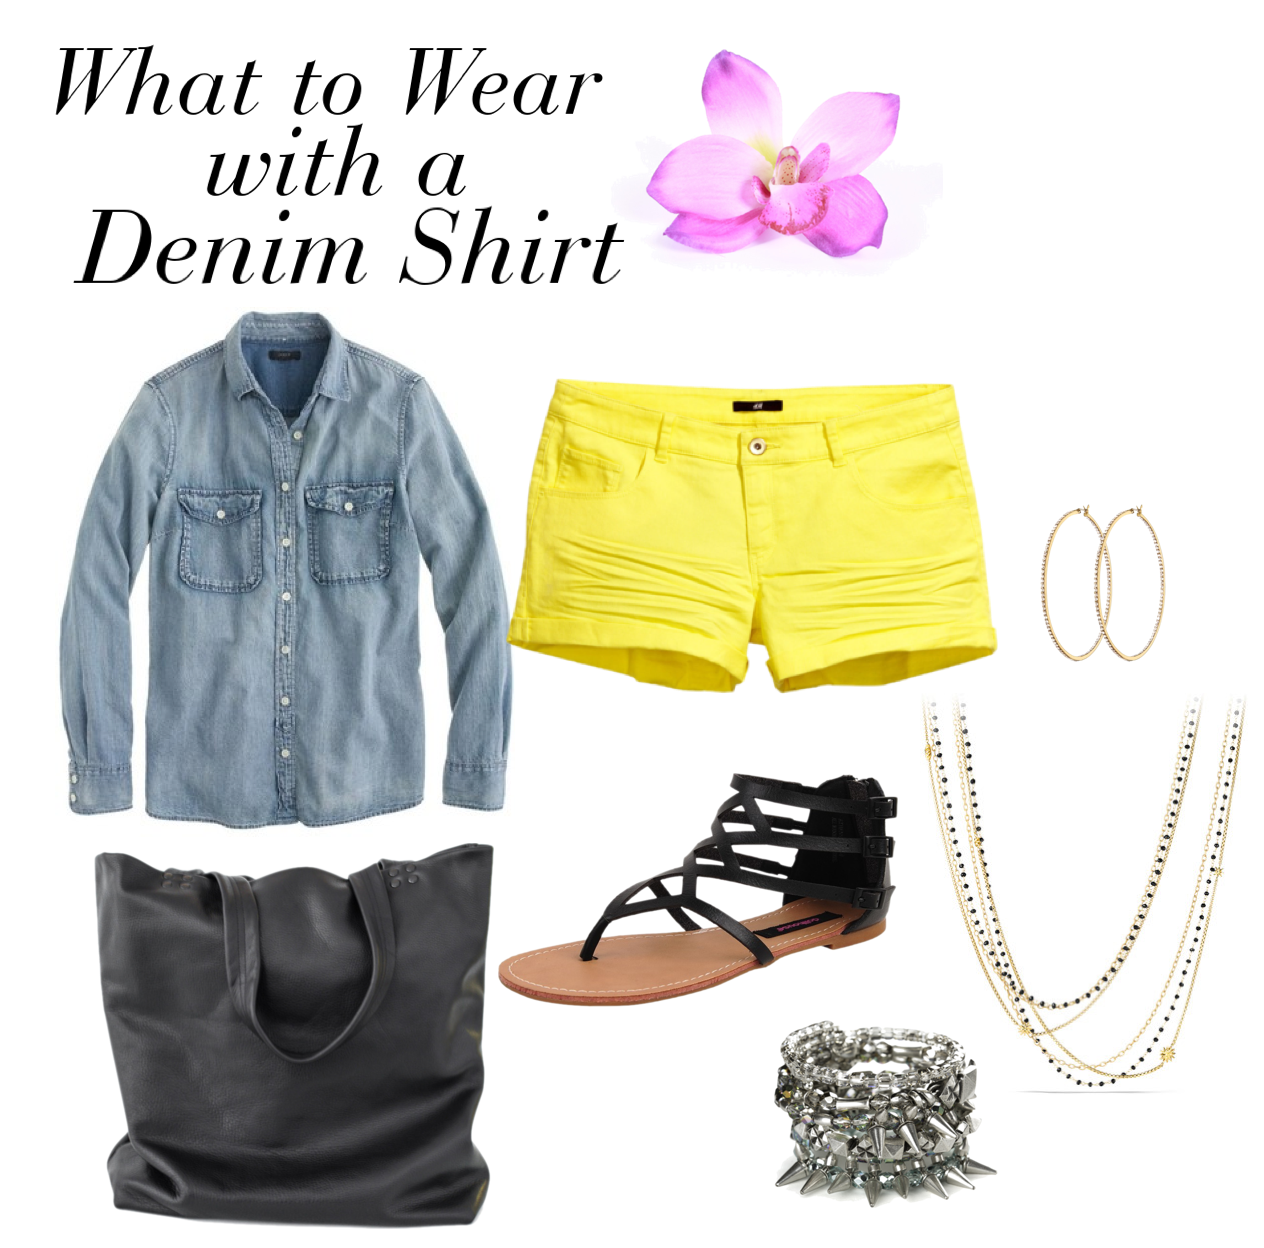 How to Wear a Denim Shirt - Stylish Life for Moms